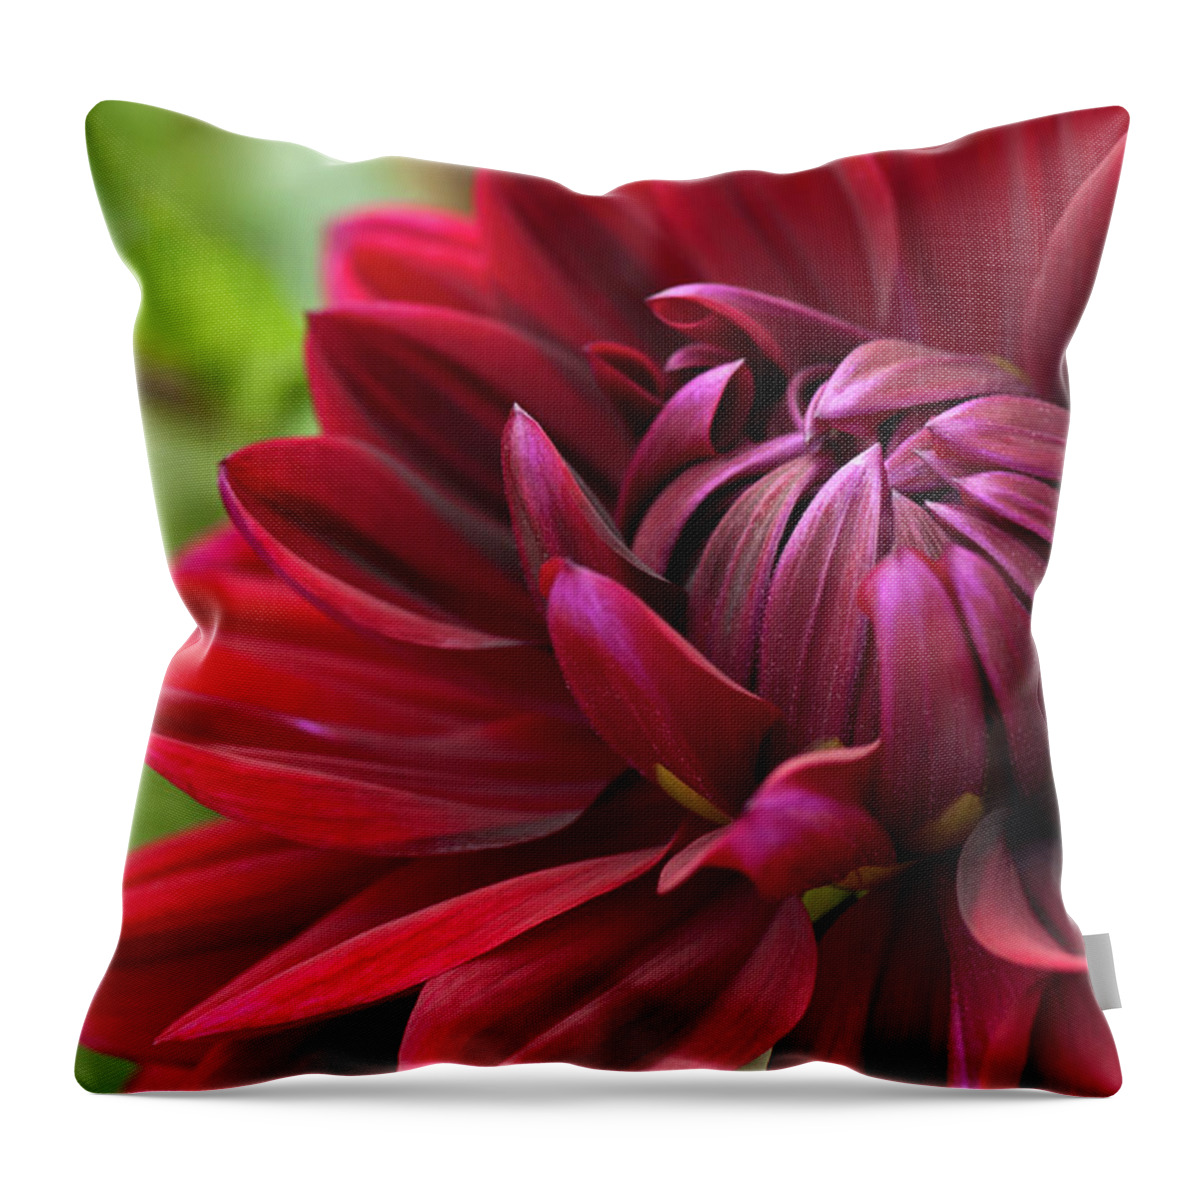 Dahlia Throw Pillow featuring the photograph Blooming red dahlia by GoodMood Art